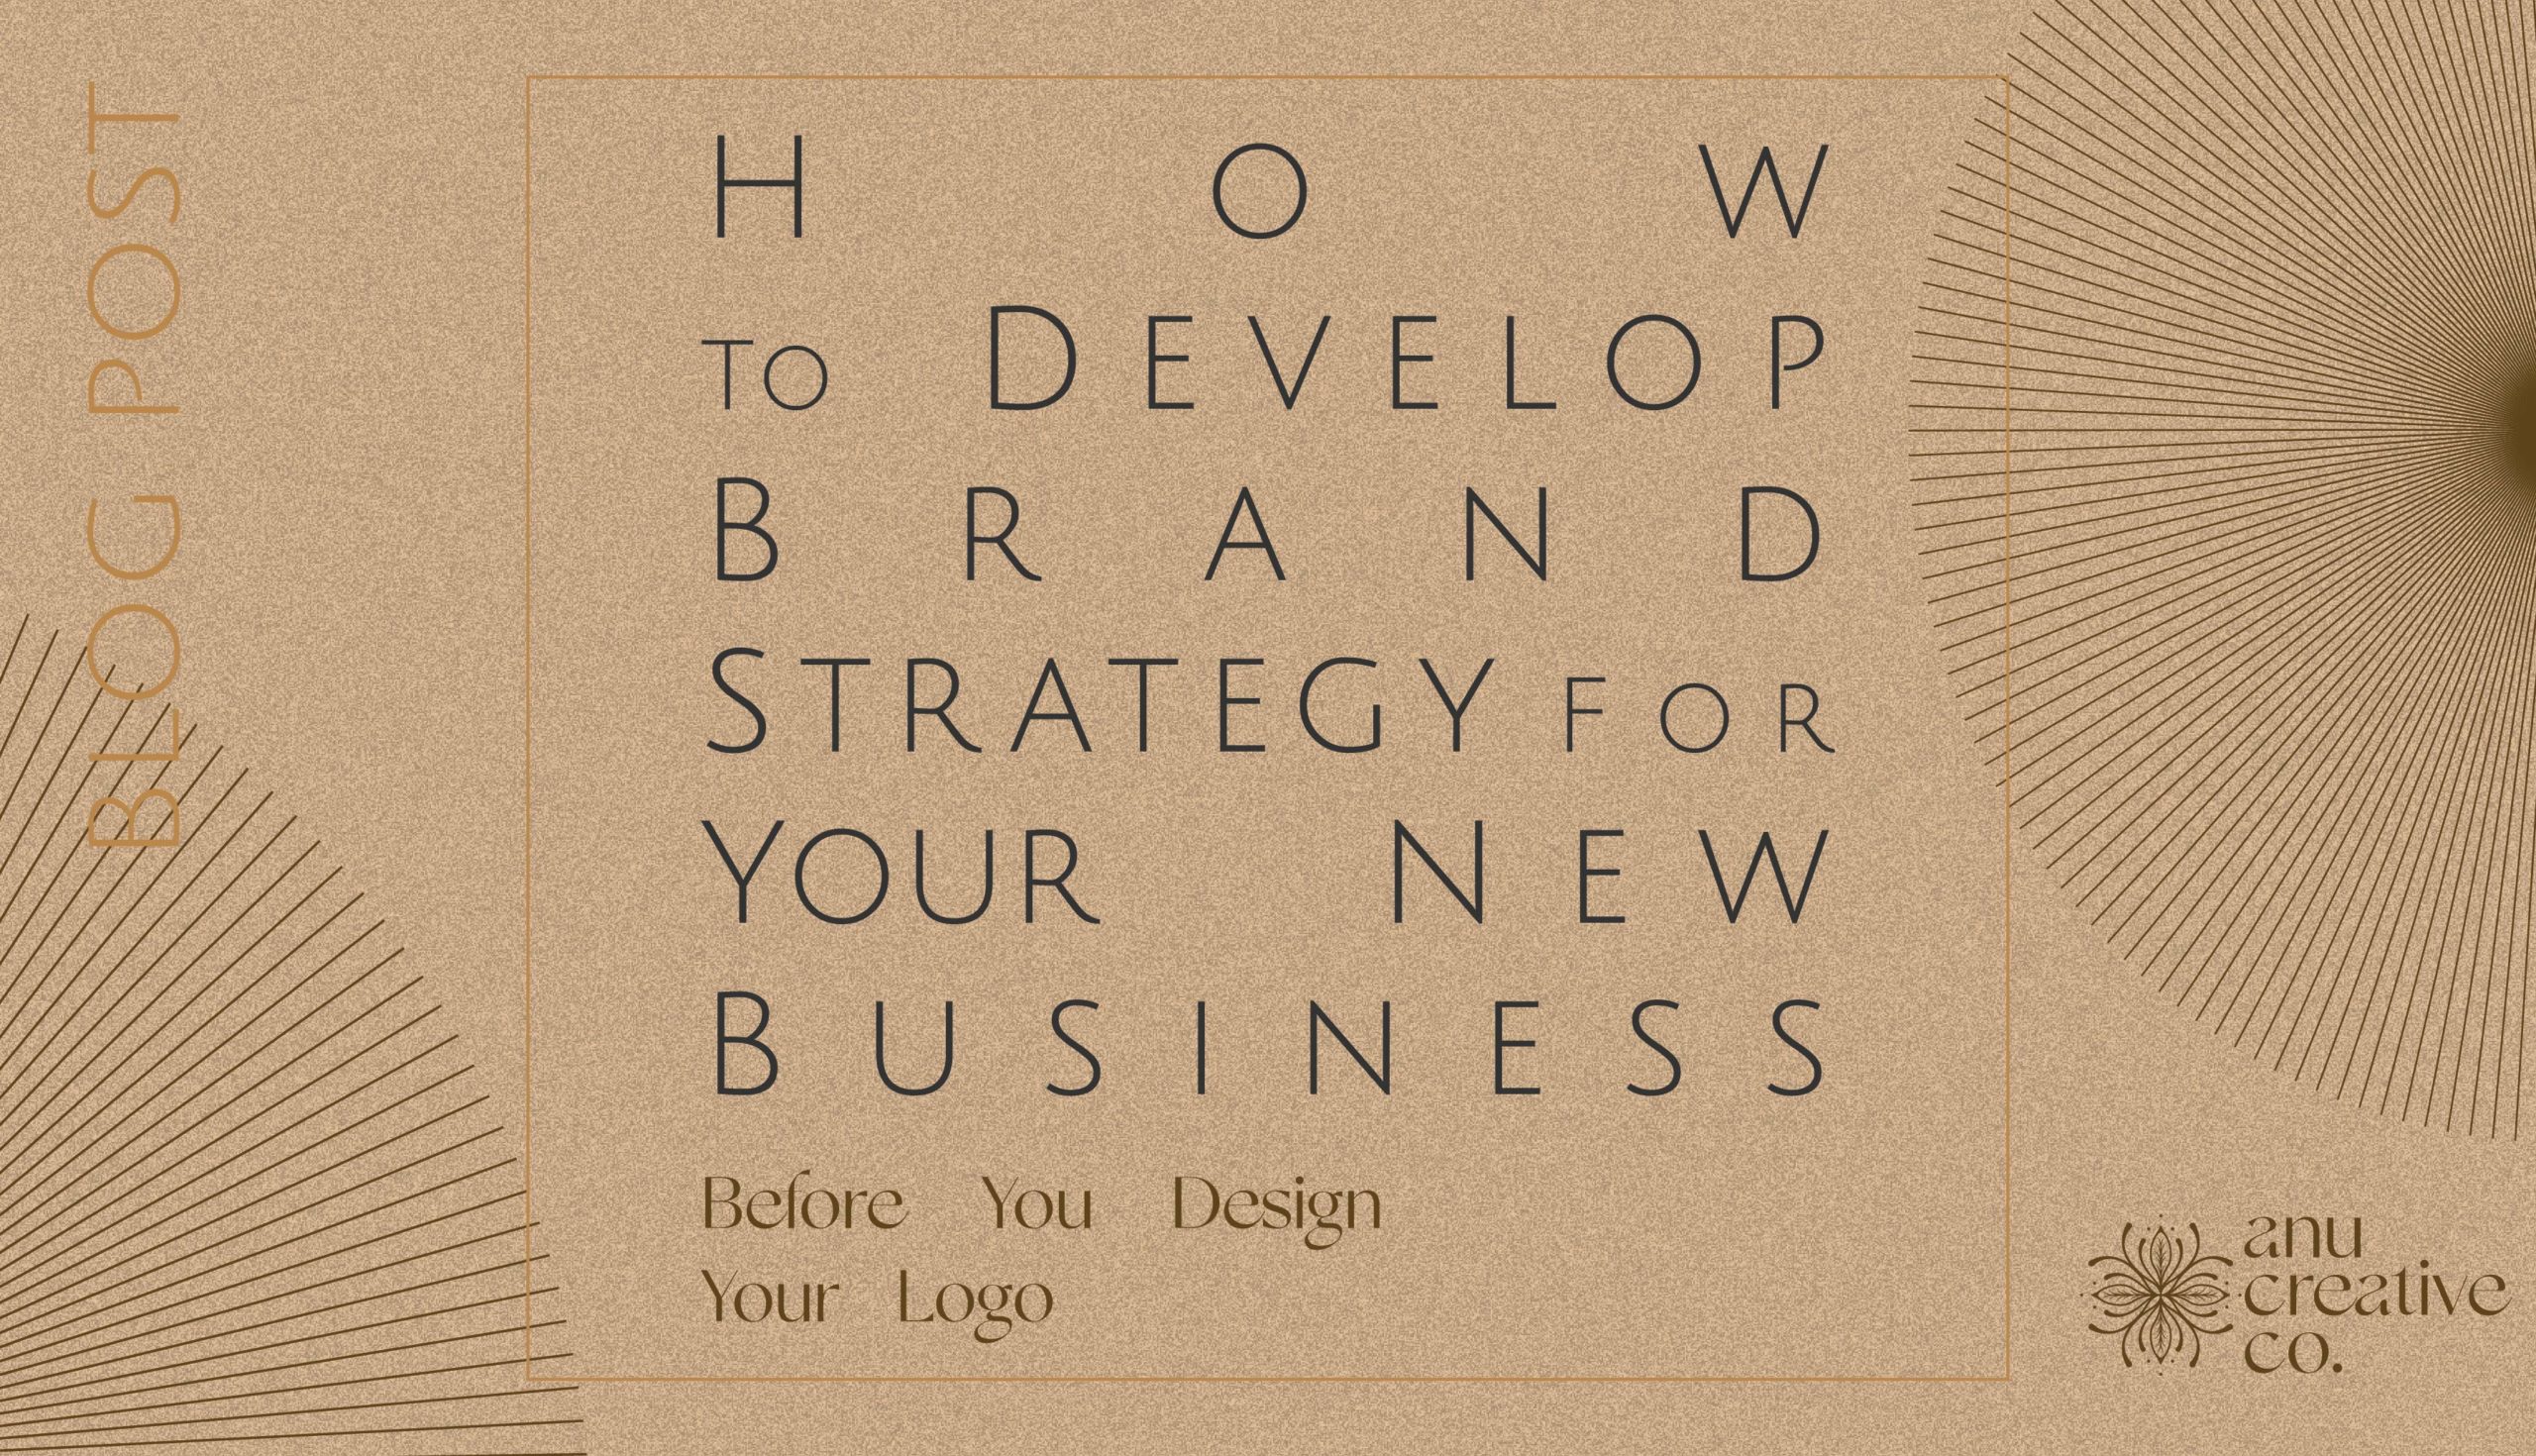 how to develop brand strategy for your new business - before you design a logo